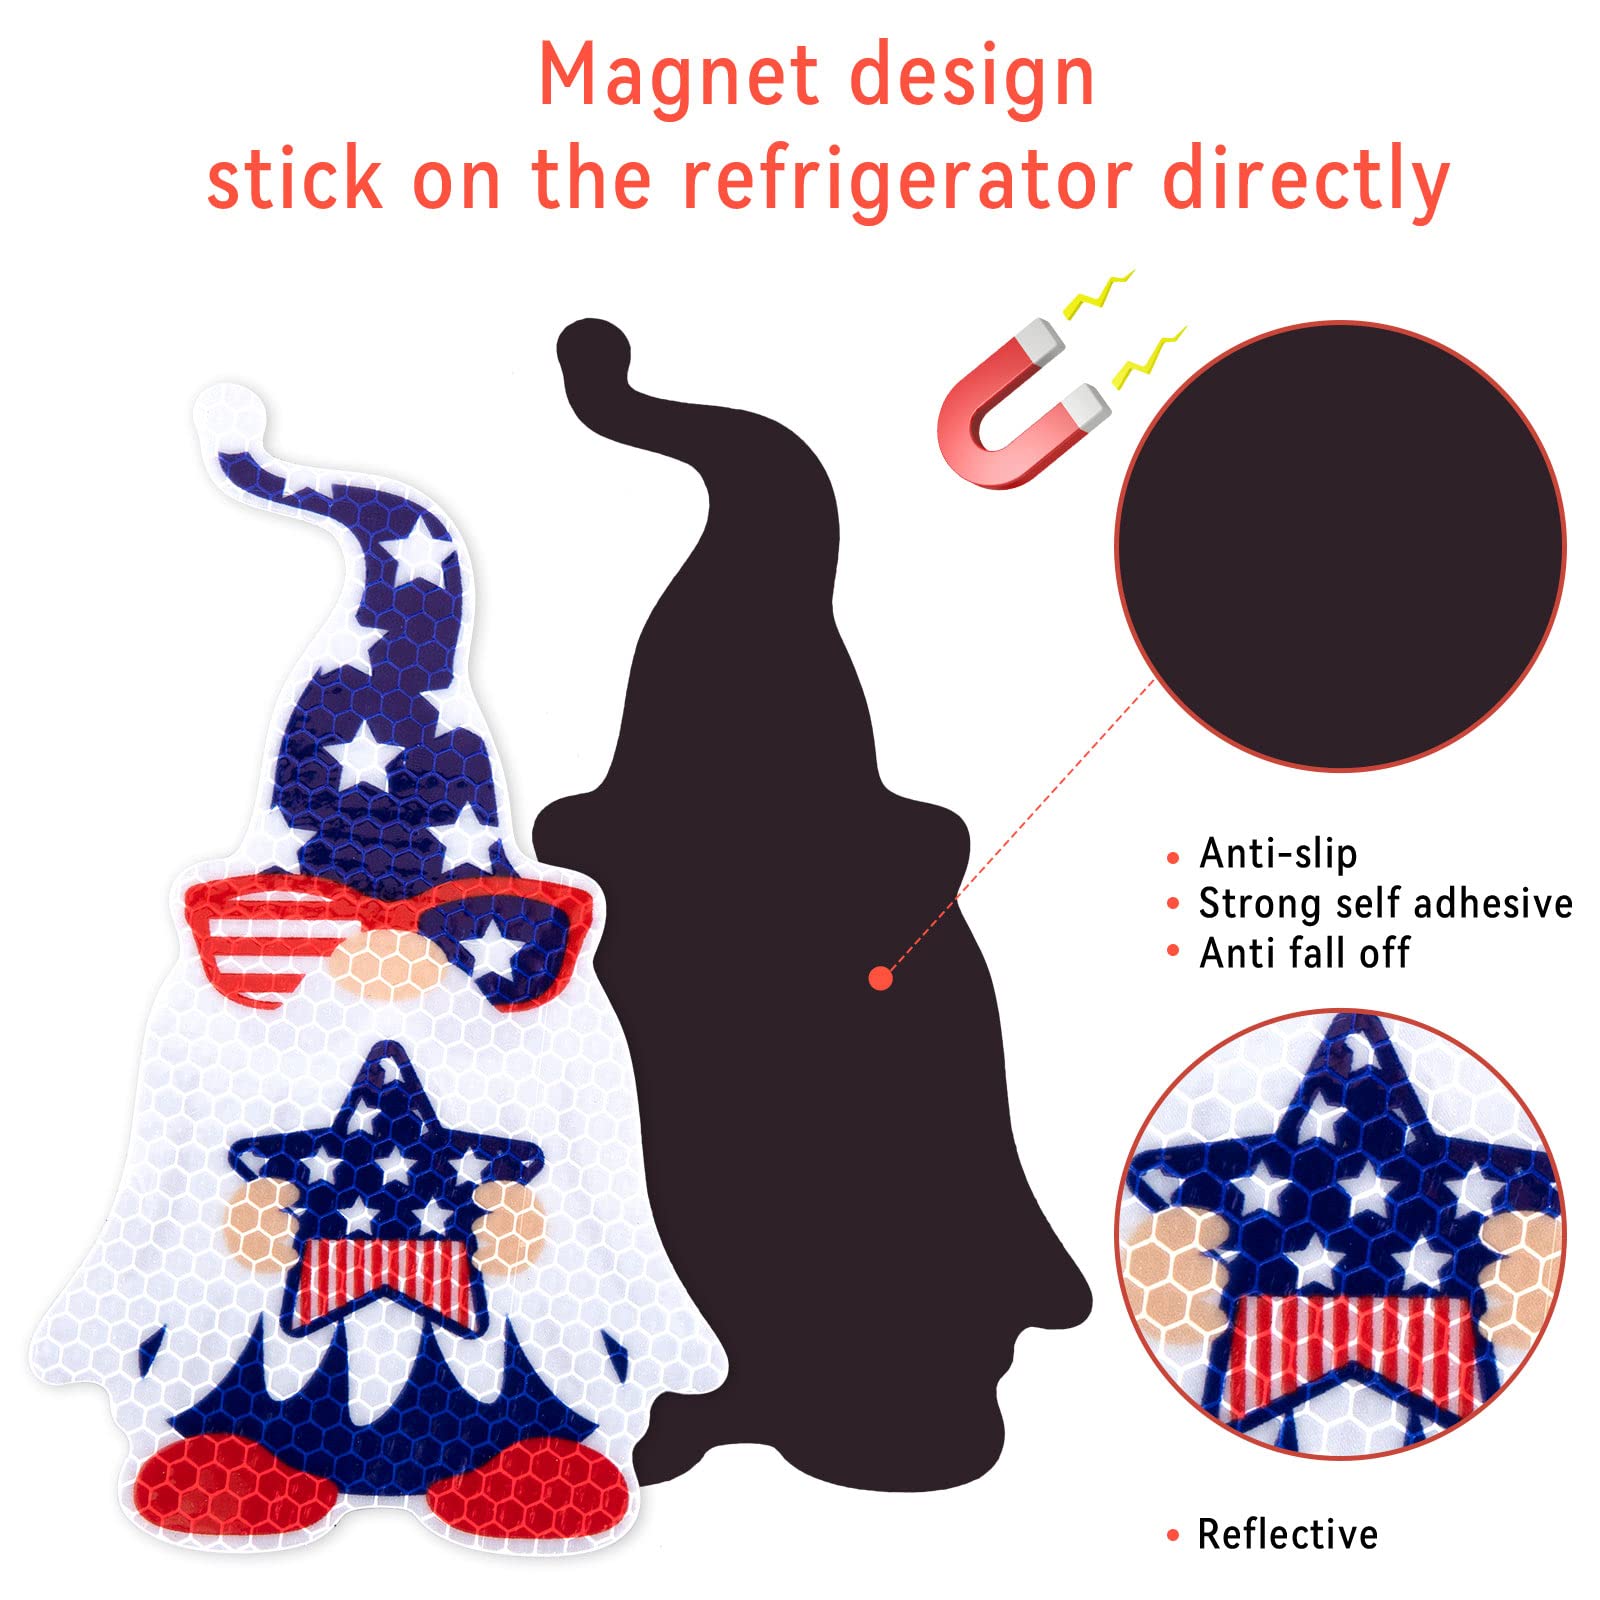 Whaline 24Pcs 4th of July Reflective Car Magnets Patriotic Refrigerator Magnets Independence Day Gnome Fridge Decor USA Flag Star Bulb Light Magnet with Lines for Kitchen,Metal Door,Cabinets,Mailbox